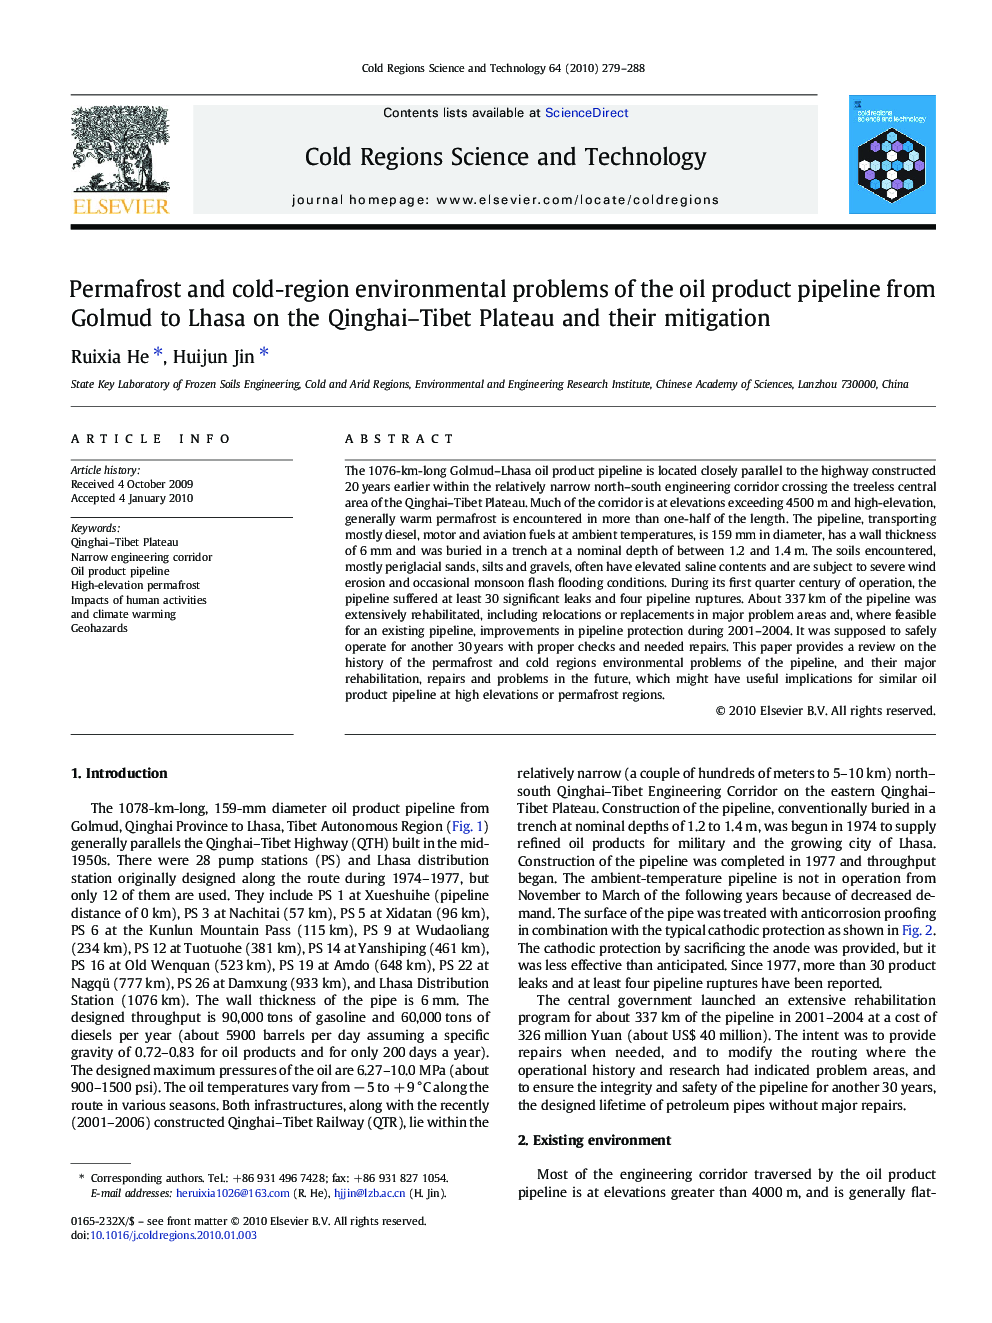 Permafrost and cold-region environmental problems of the oil product pipeline from Golmud to Lhasa on the Qinghai–Tibet Plateau and their mitigation